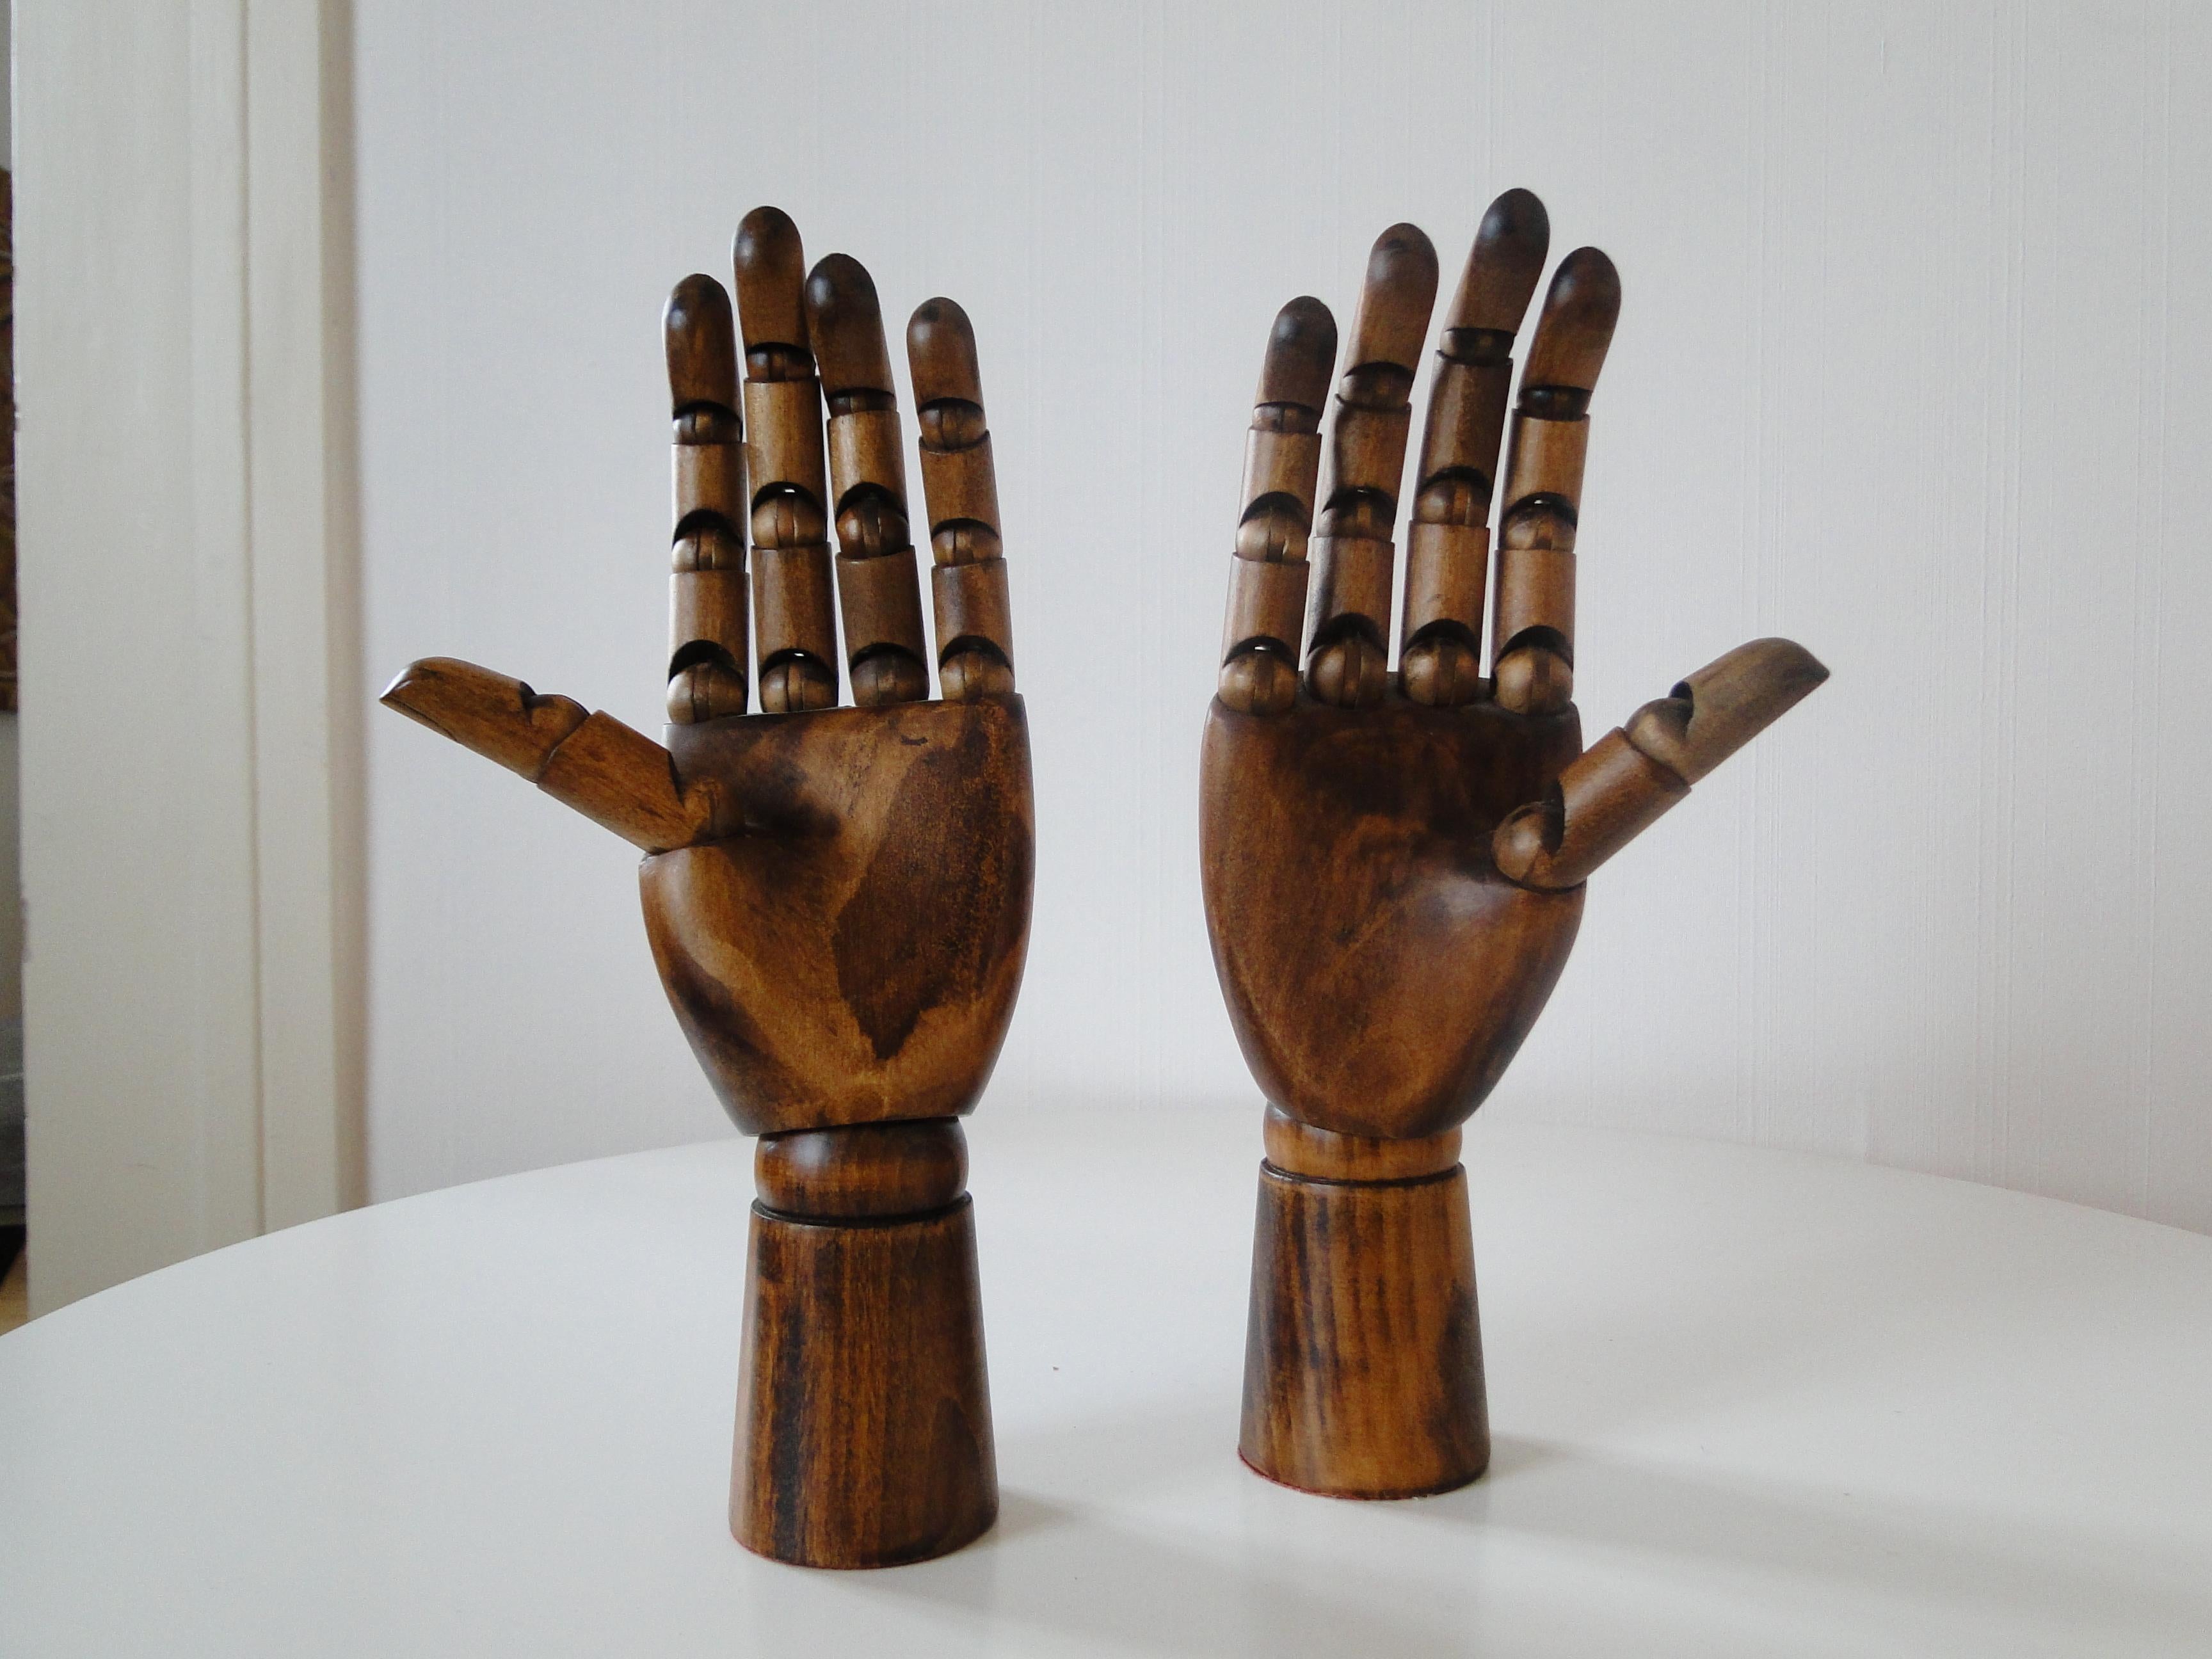 Pair of articulated wooden hands.
The wrist is also articulated.
Very good condition